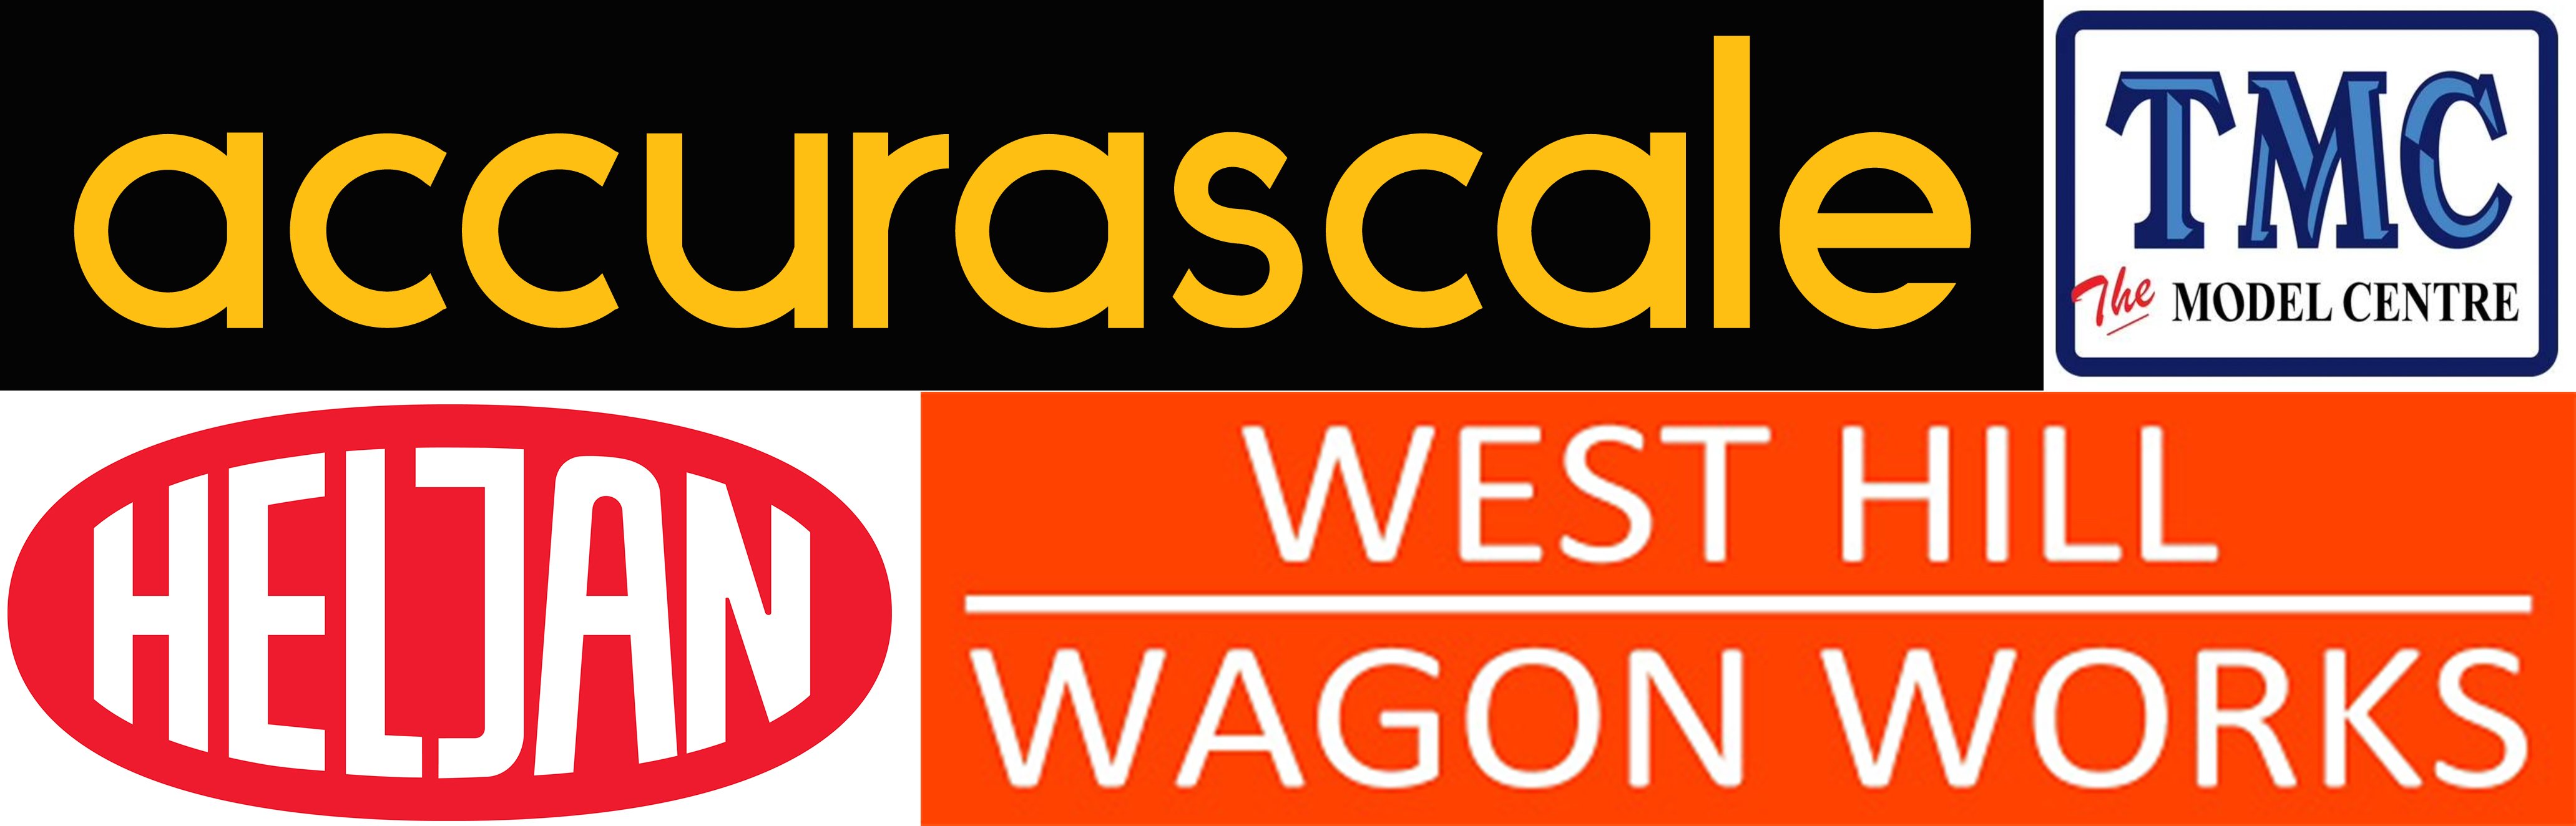 Great Electric Train Show 2024 sponsors: Accurascale, Heljan, TMC and West Hill Wagon Works.